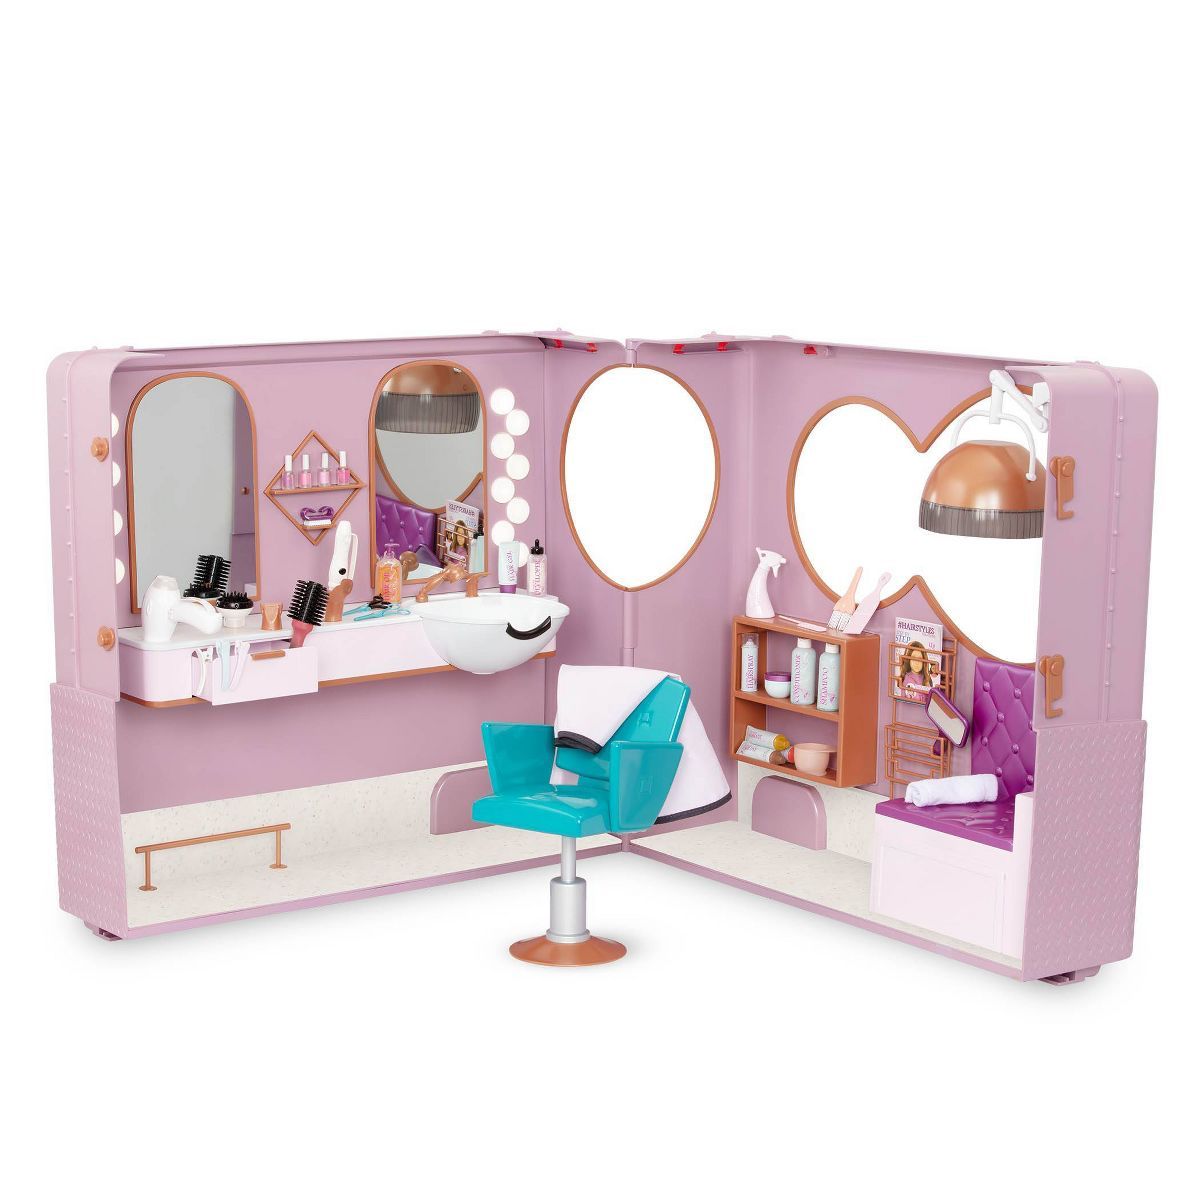 Our Generation Hair Salon Playset for 18" Dolls | Target